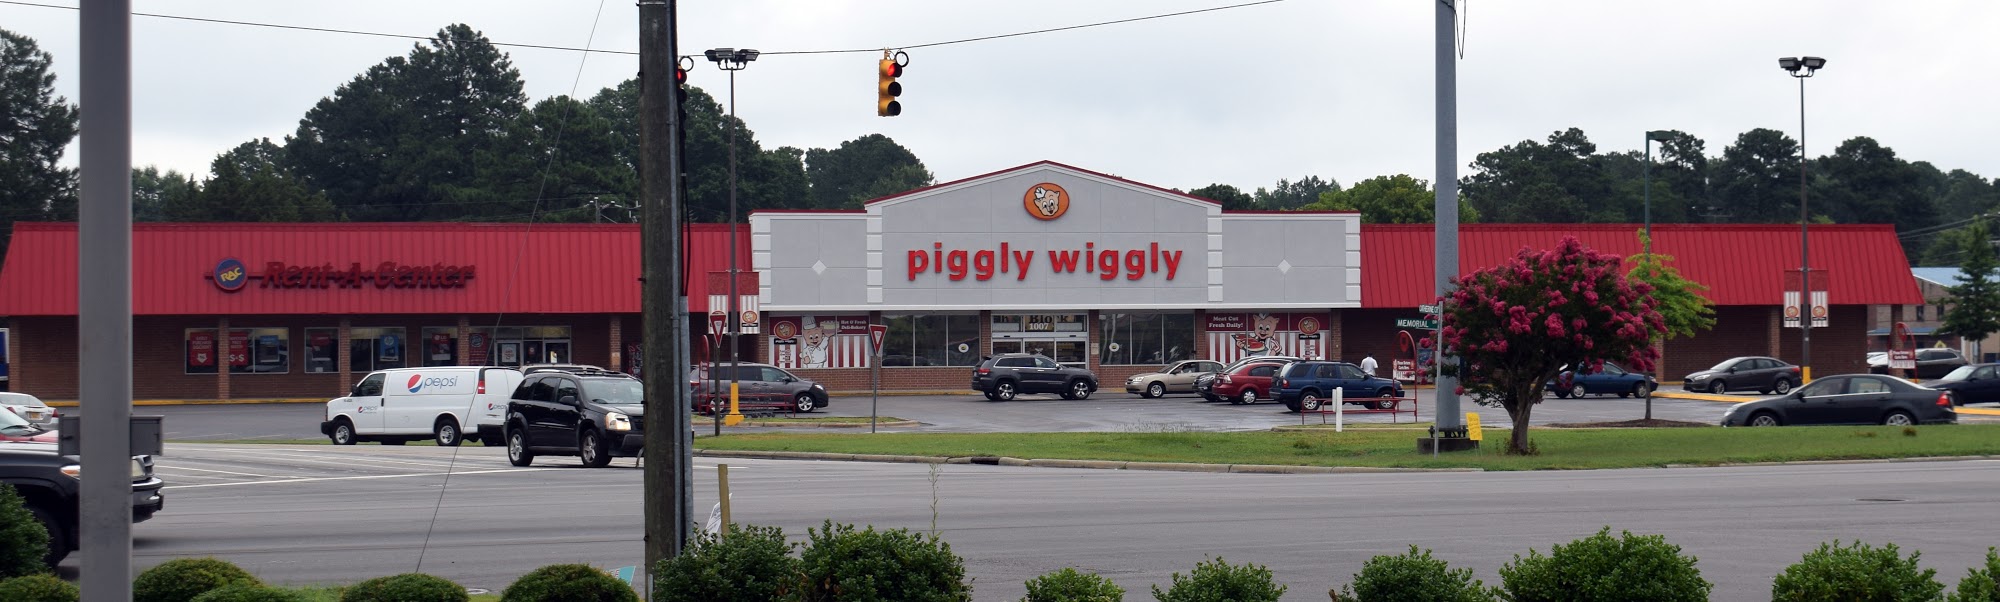 Piggly Wiggly- Ahoskie